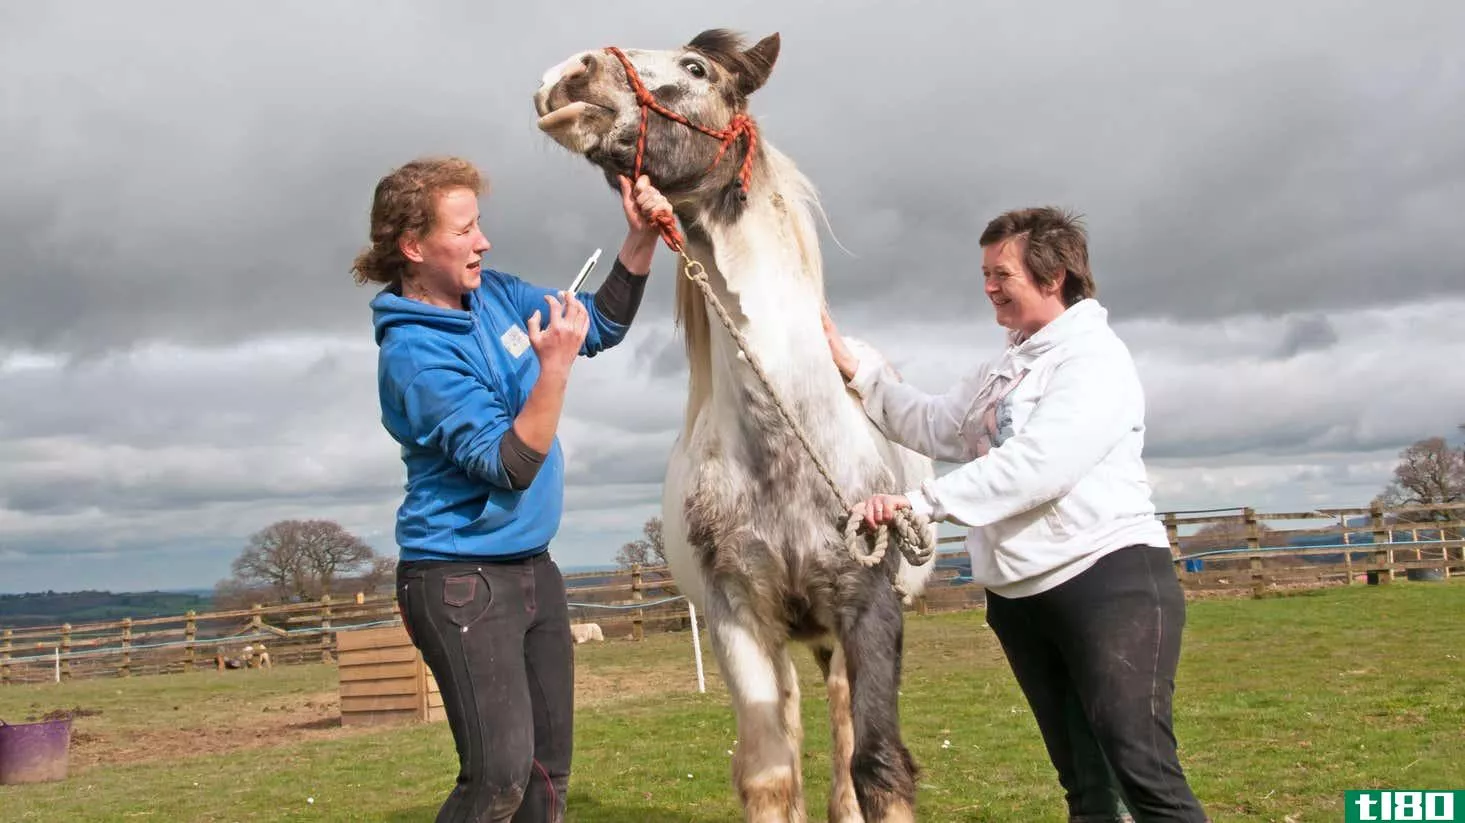 Routine wormer being administered by needle to a uncooperative horse by two women veterinarians 